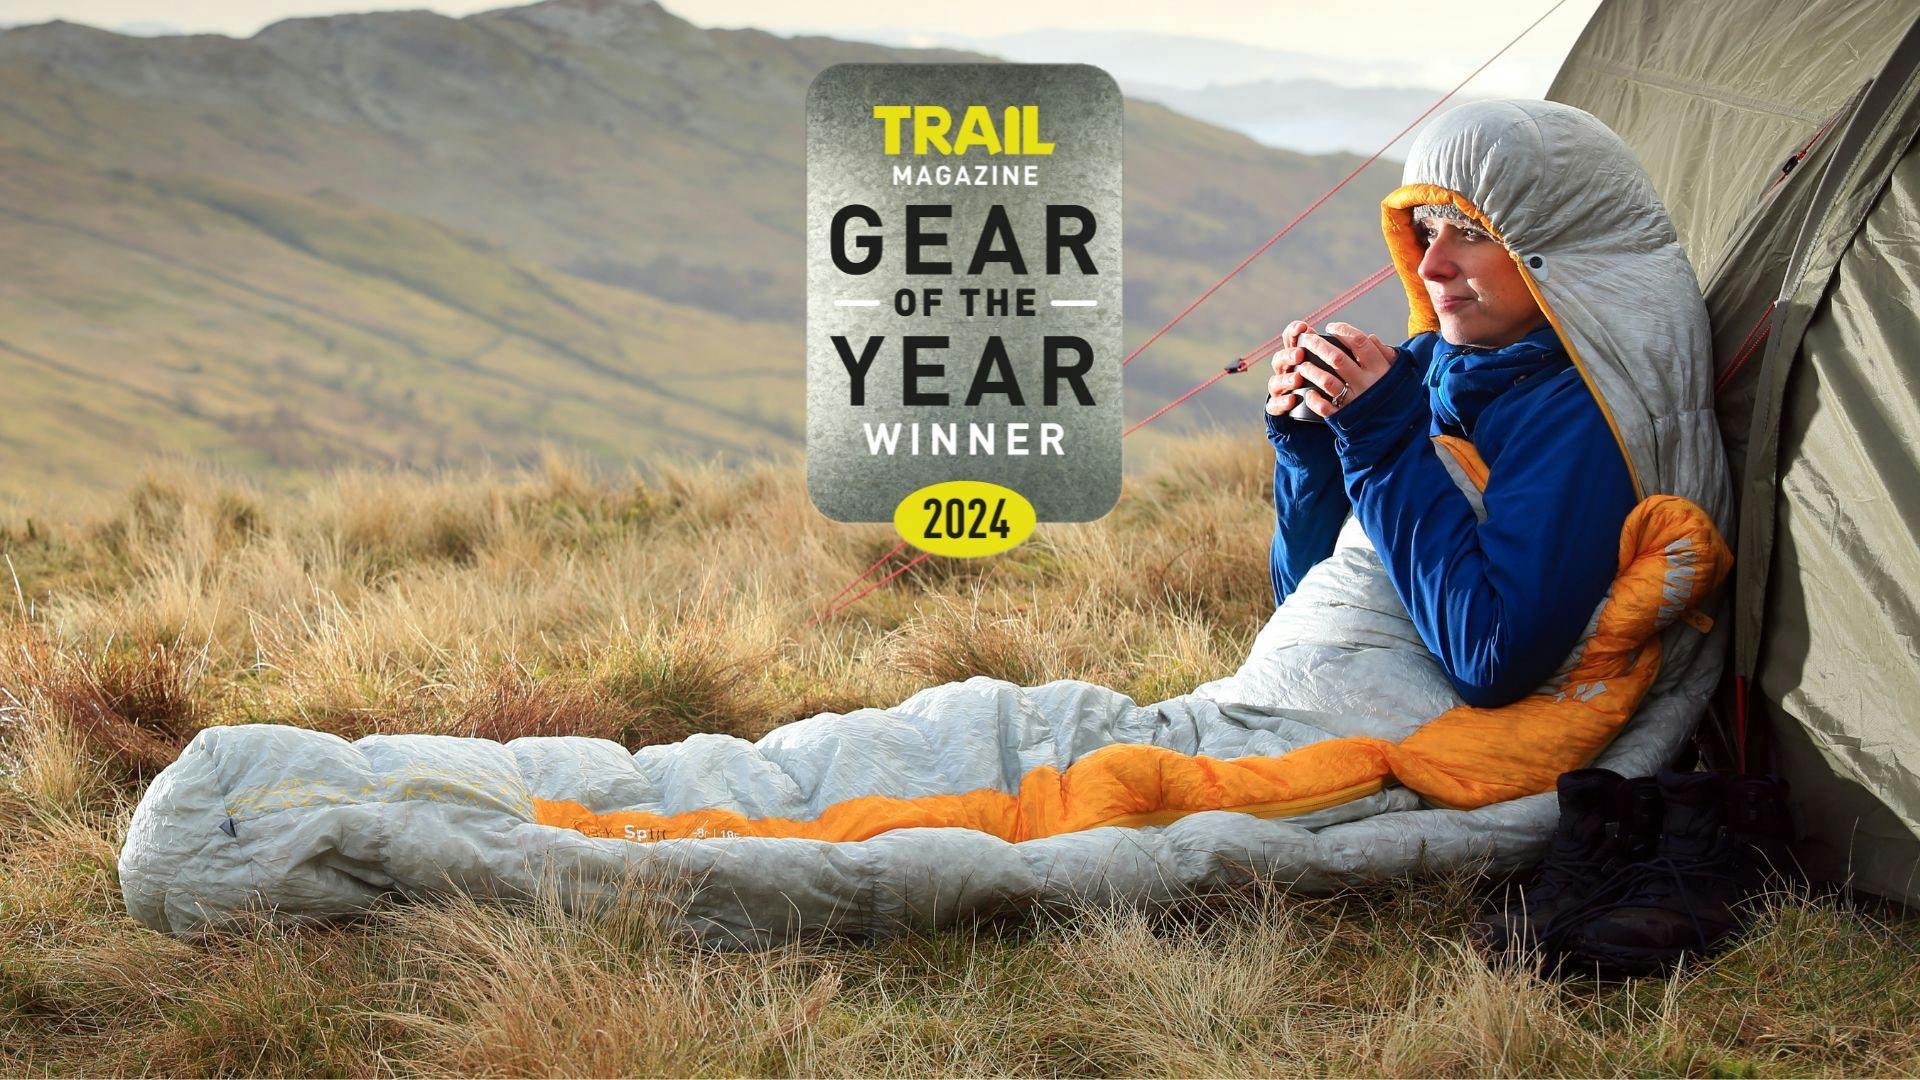 Sea to Summit Spark SPIII tested and reviewed